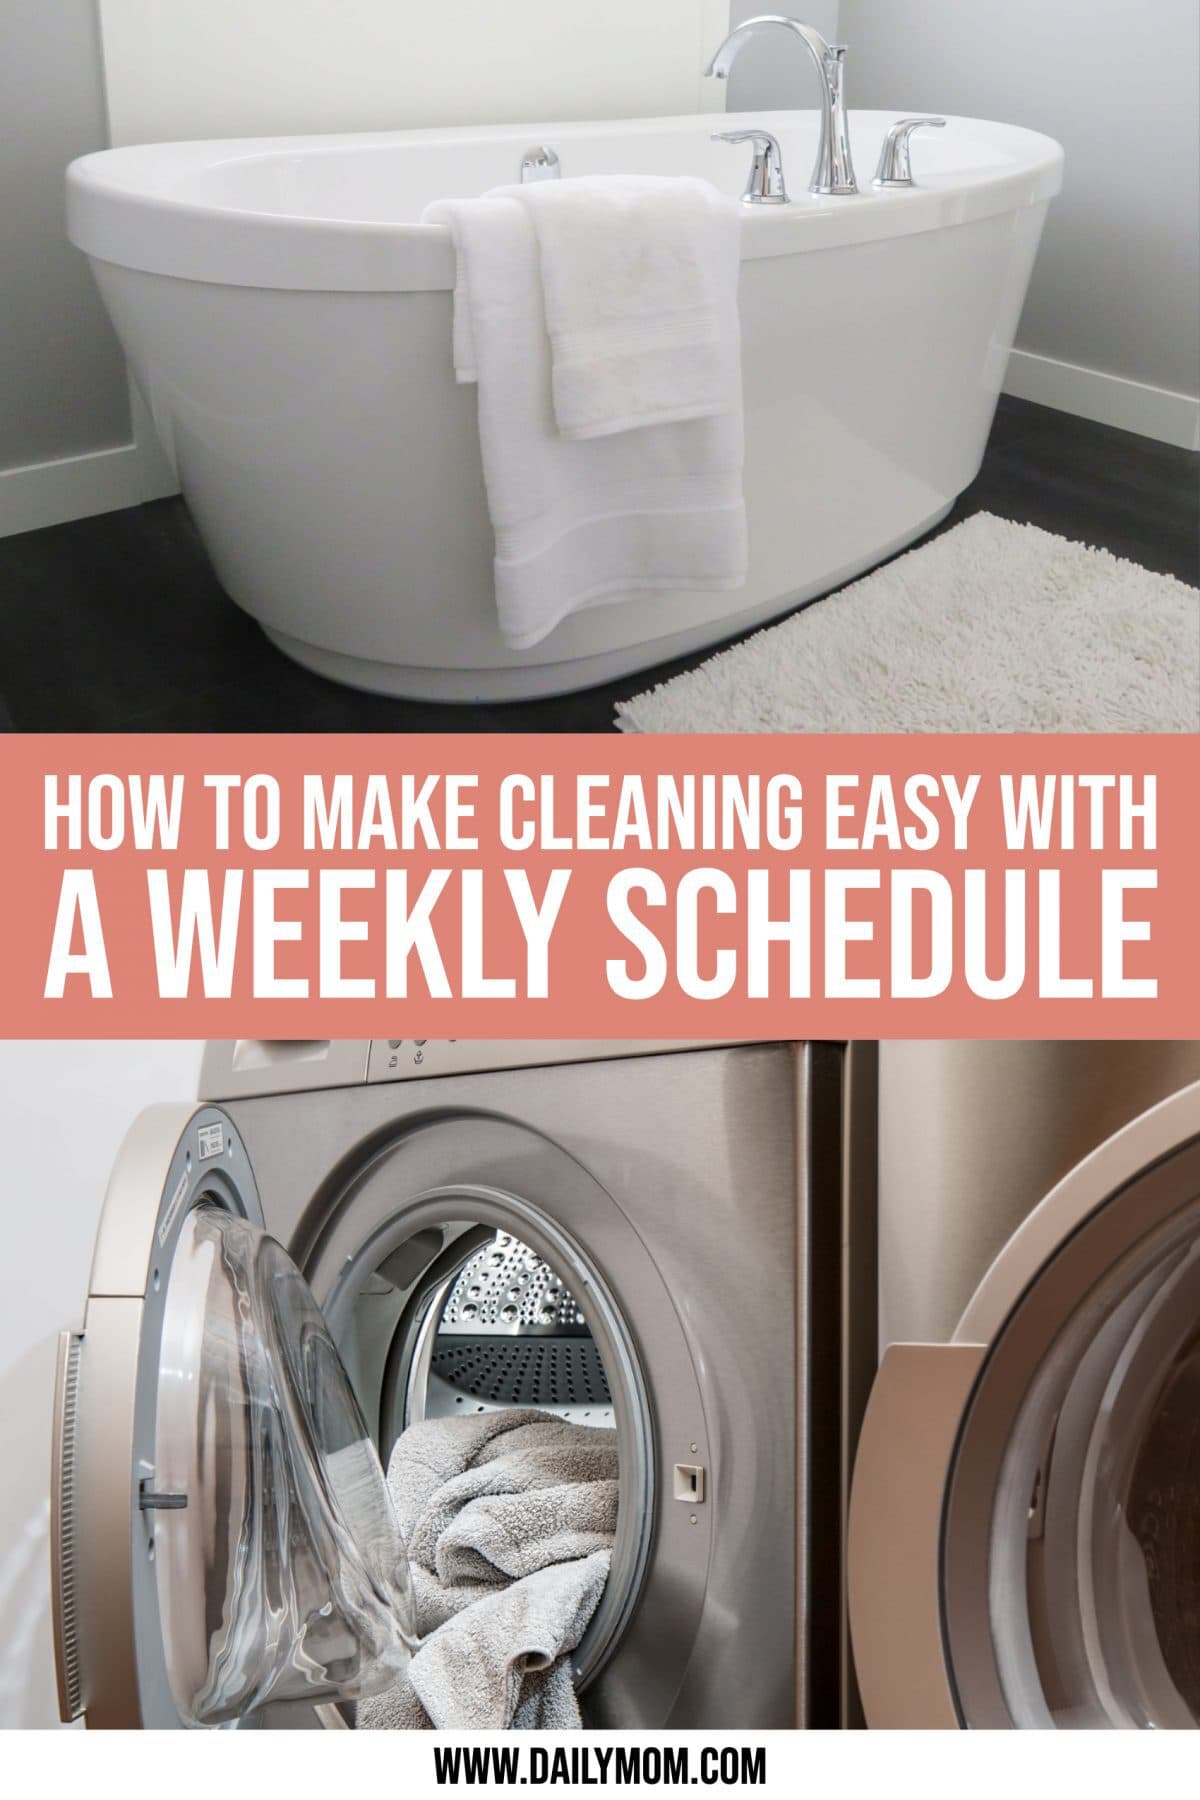 House Cleaning Tips And A Weekly Schedule